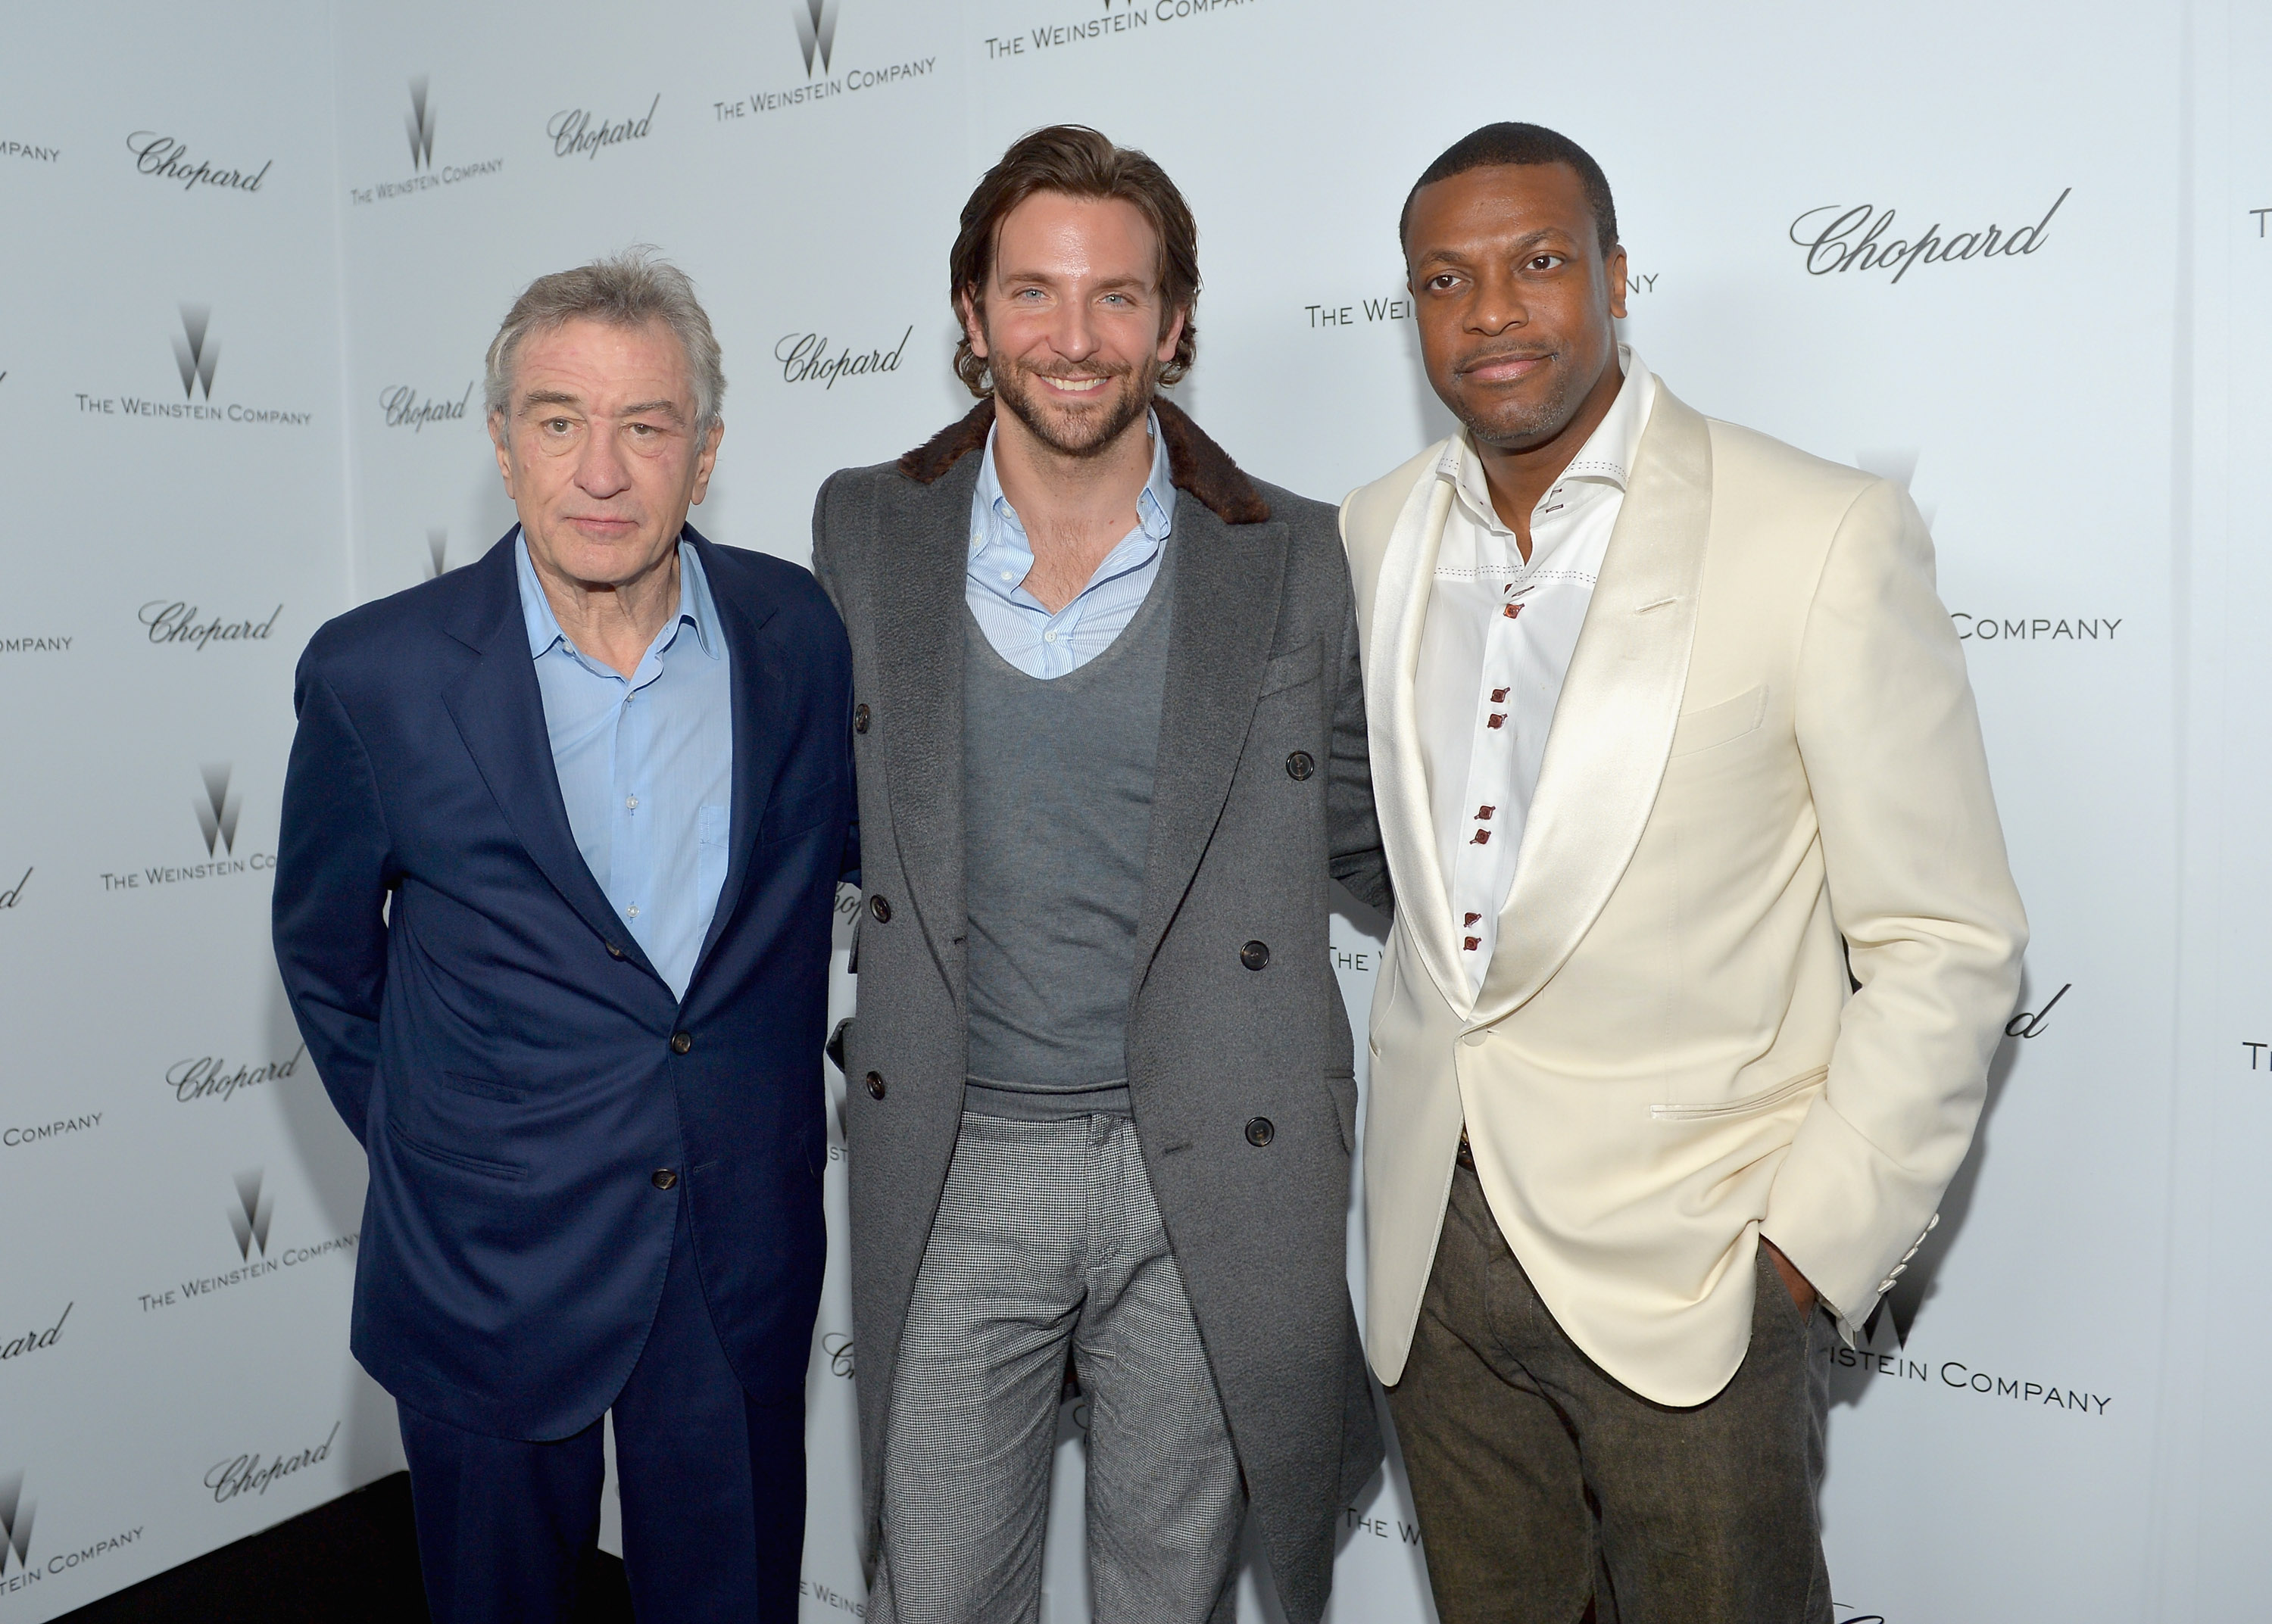 WEST HOLLYWOOD, CA - FEBRUARY 23:  (L-R) Actors Robert De Niro, Bradley Cooper, and Chris Tucker attend The Weinstein Company and Chopard's Academy Award Party in association with Grey Goose at Soho House on February 23, 2013 in West Hollywood, California.  (Photo by Charley Gallay/Getty Images for Grey Goose vodka)